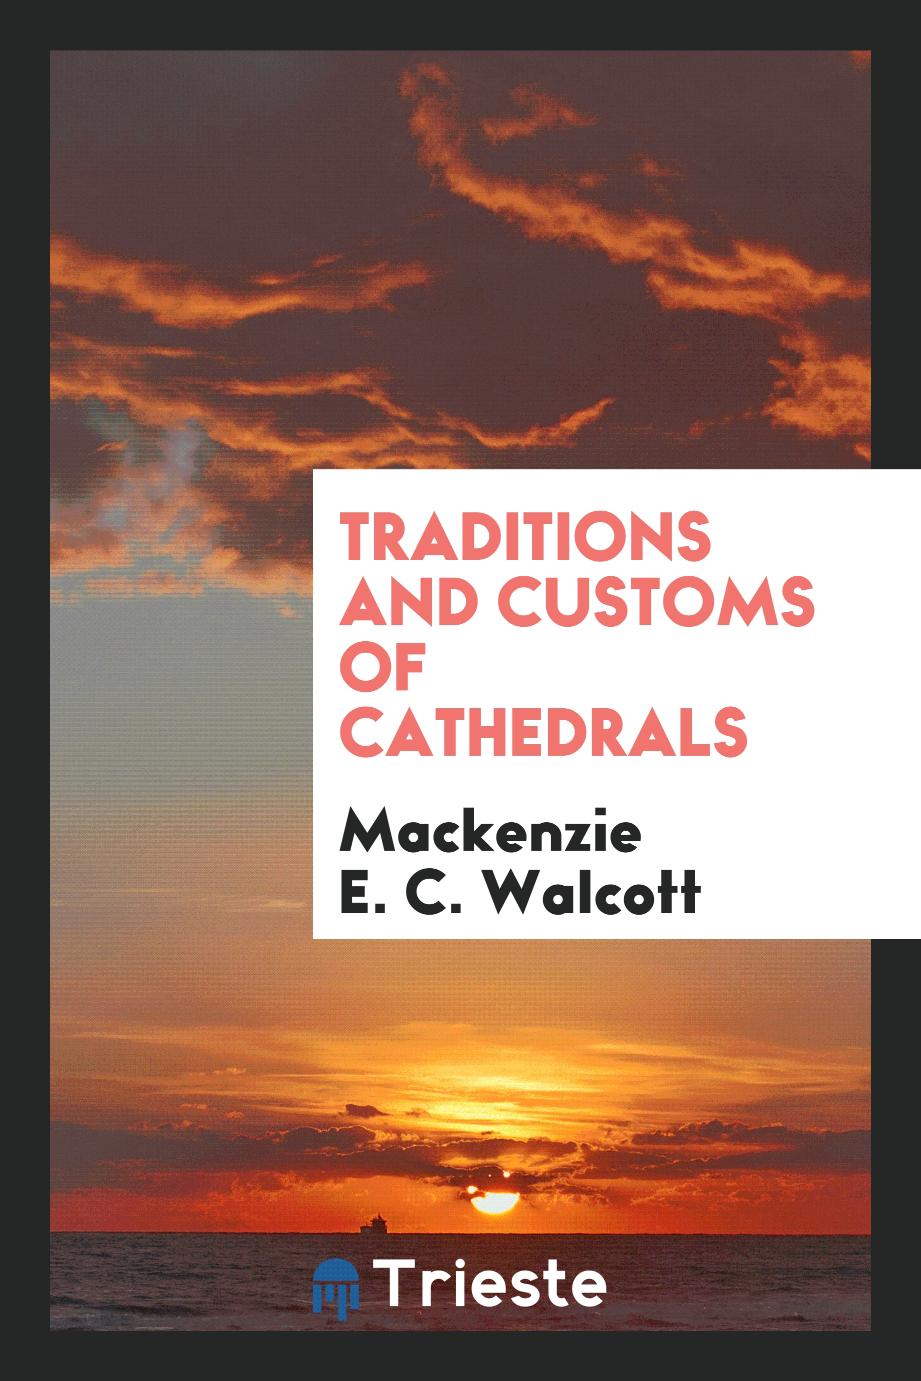 Traditions and Customs of Cathedrals